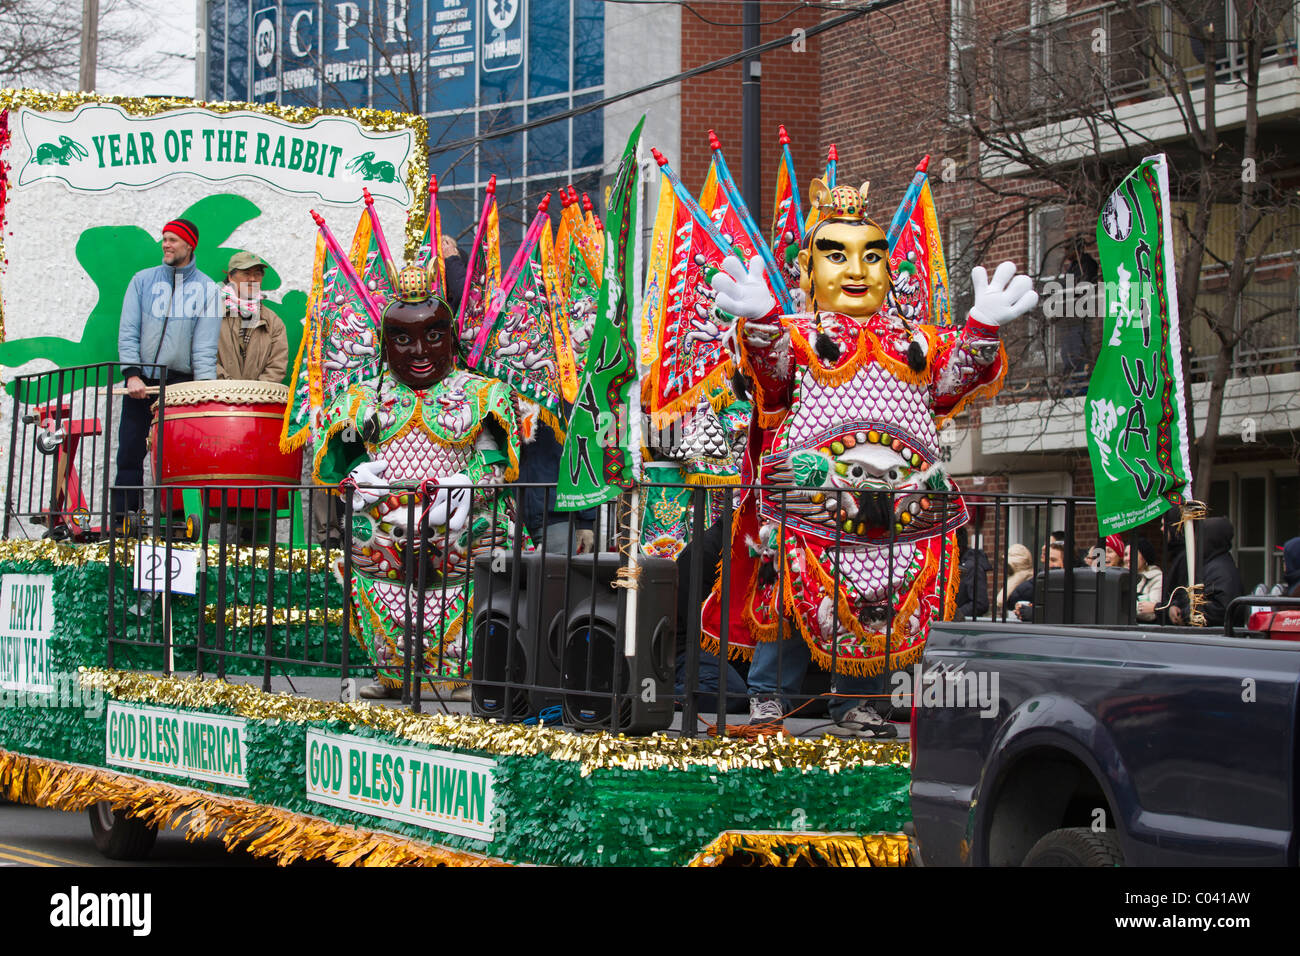 God Bless Taiwan float carrying two Buddhas in the 2011 Lunar New Year Parade in Flushing, Queens, New York Stock Photo